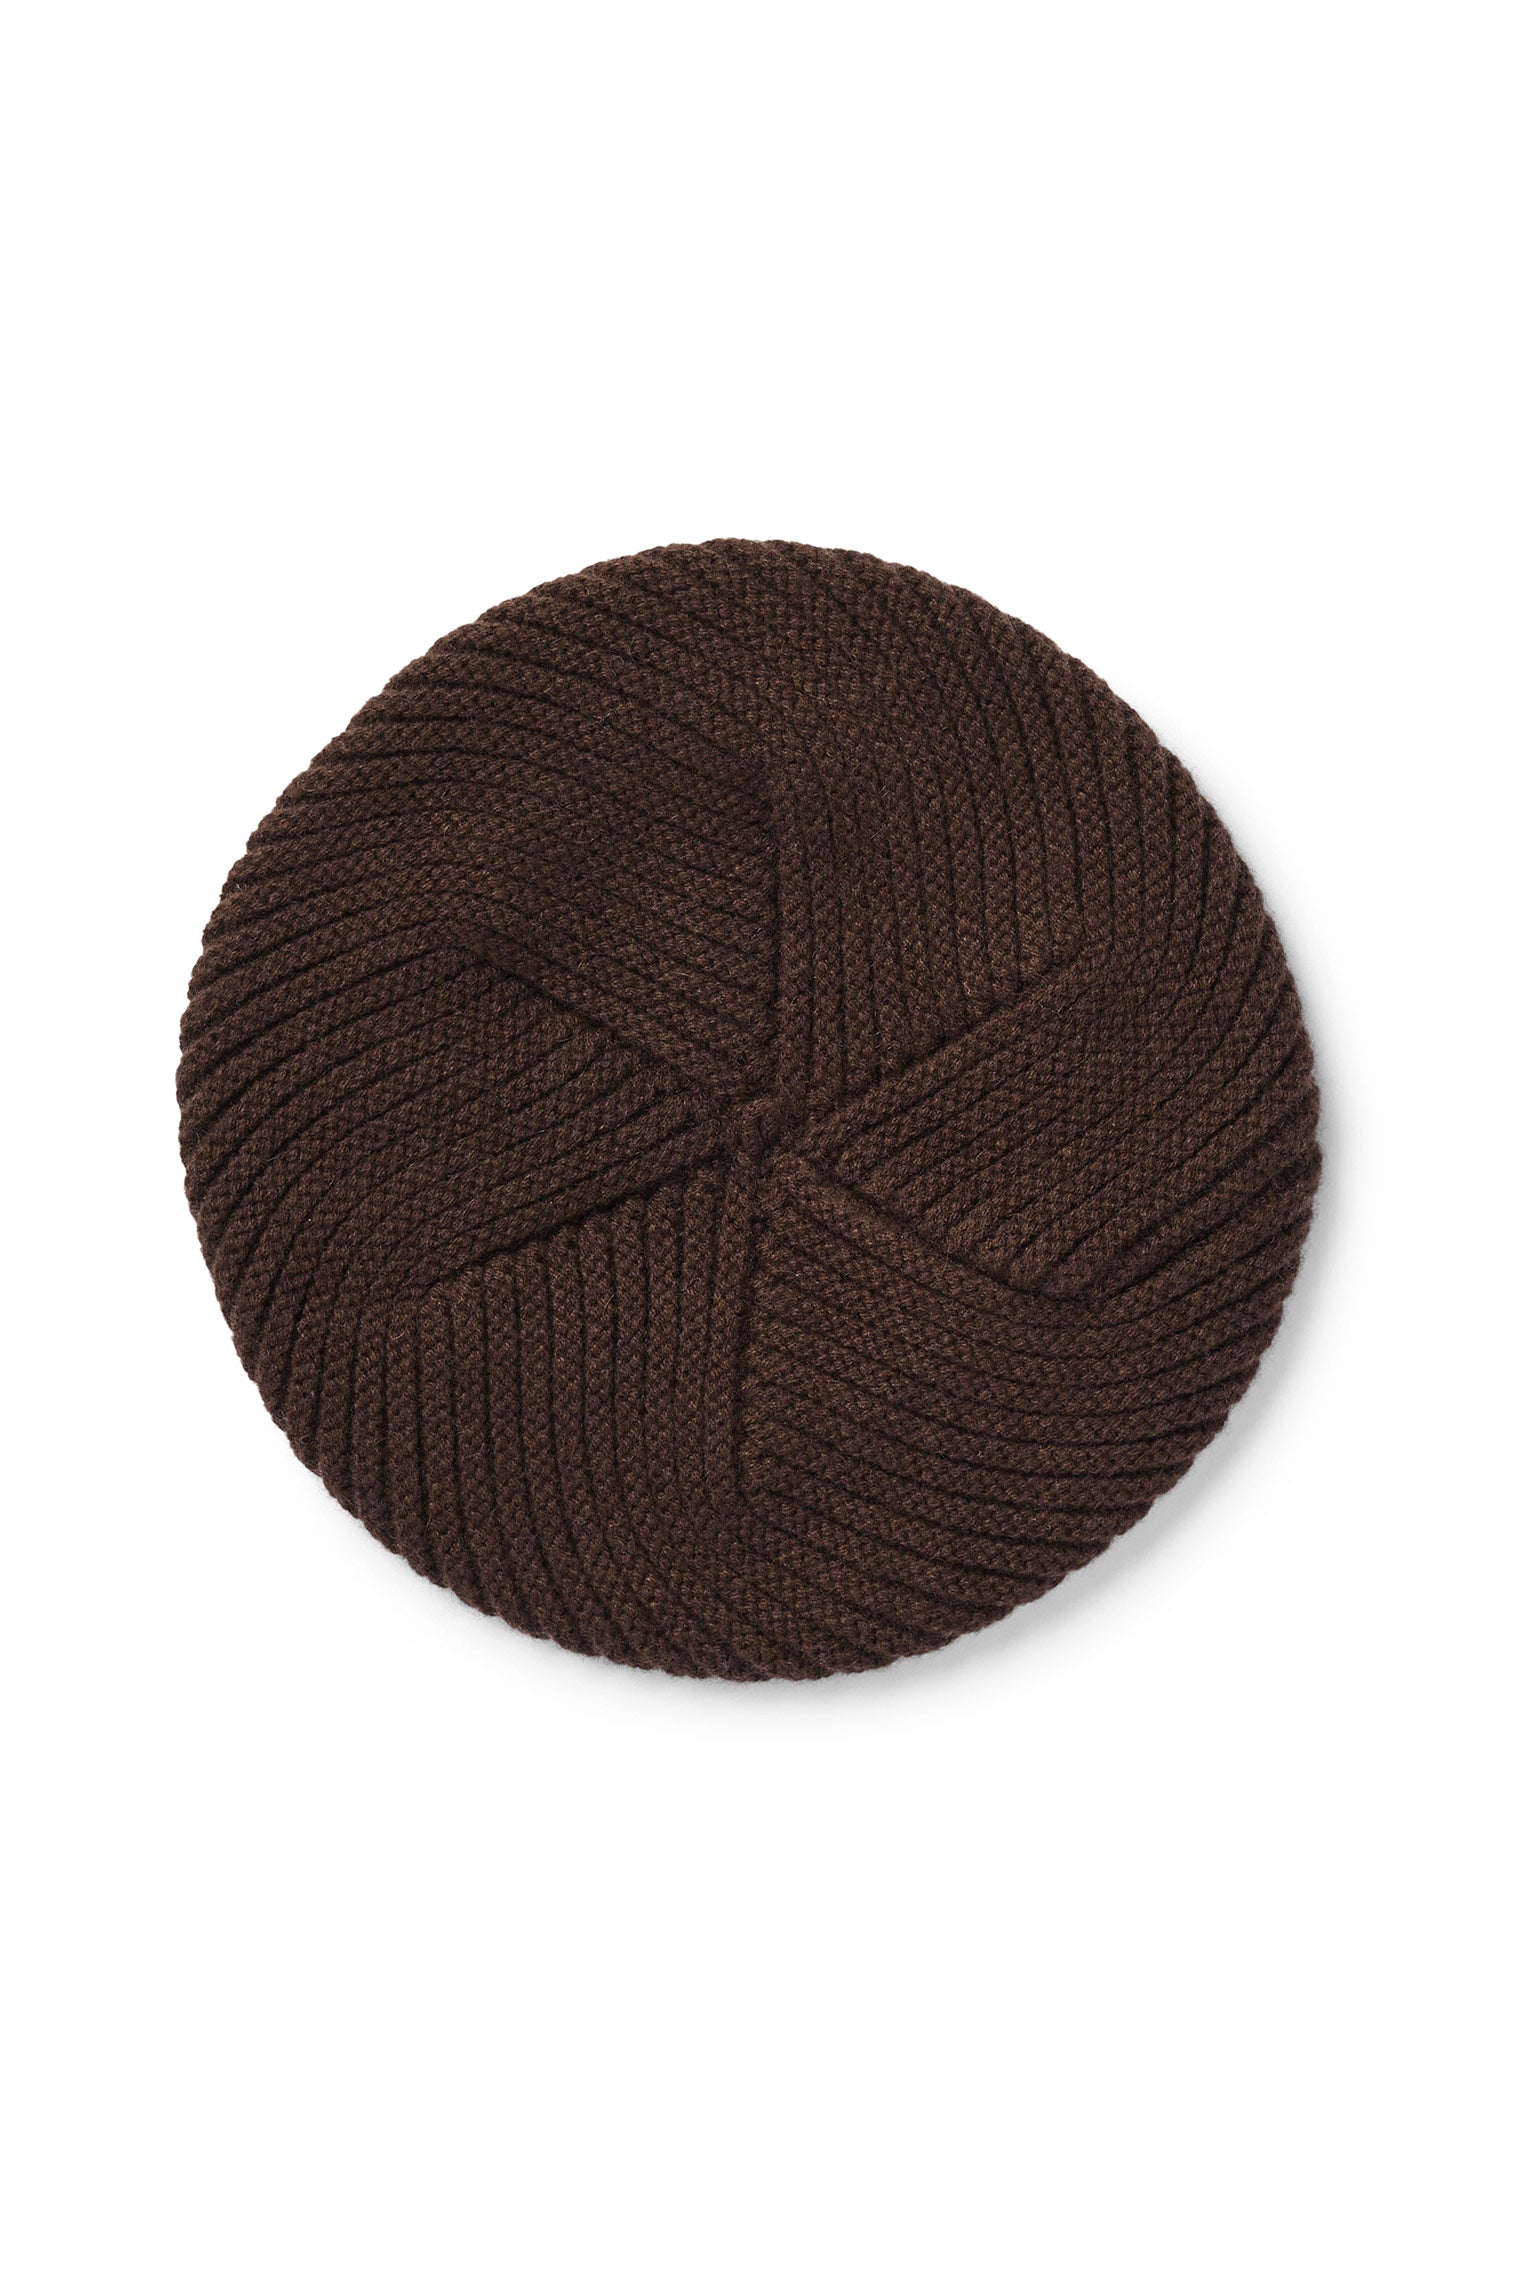 Brown Knitted Cashmere Beret - Women’s Hats - Lock & Co. Hatters London UK